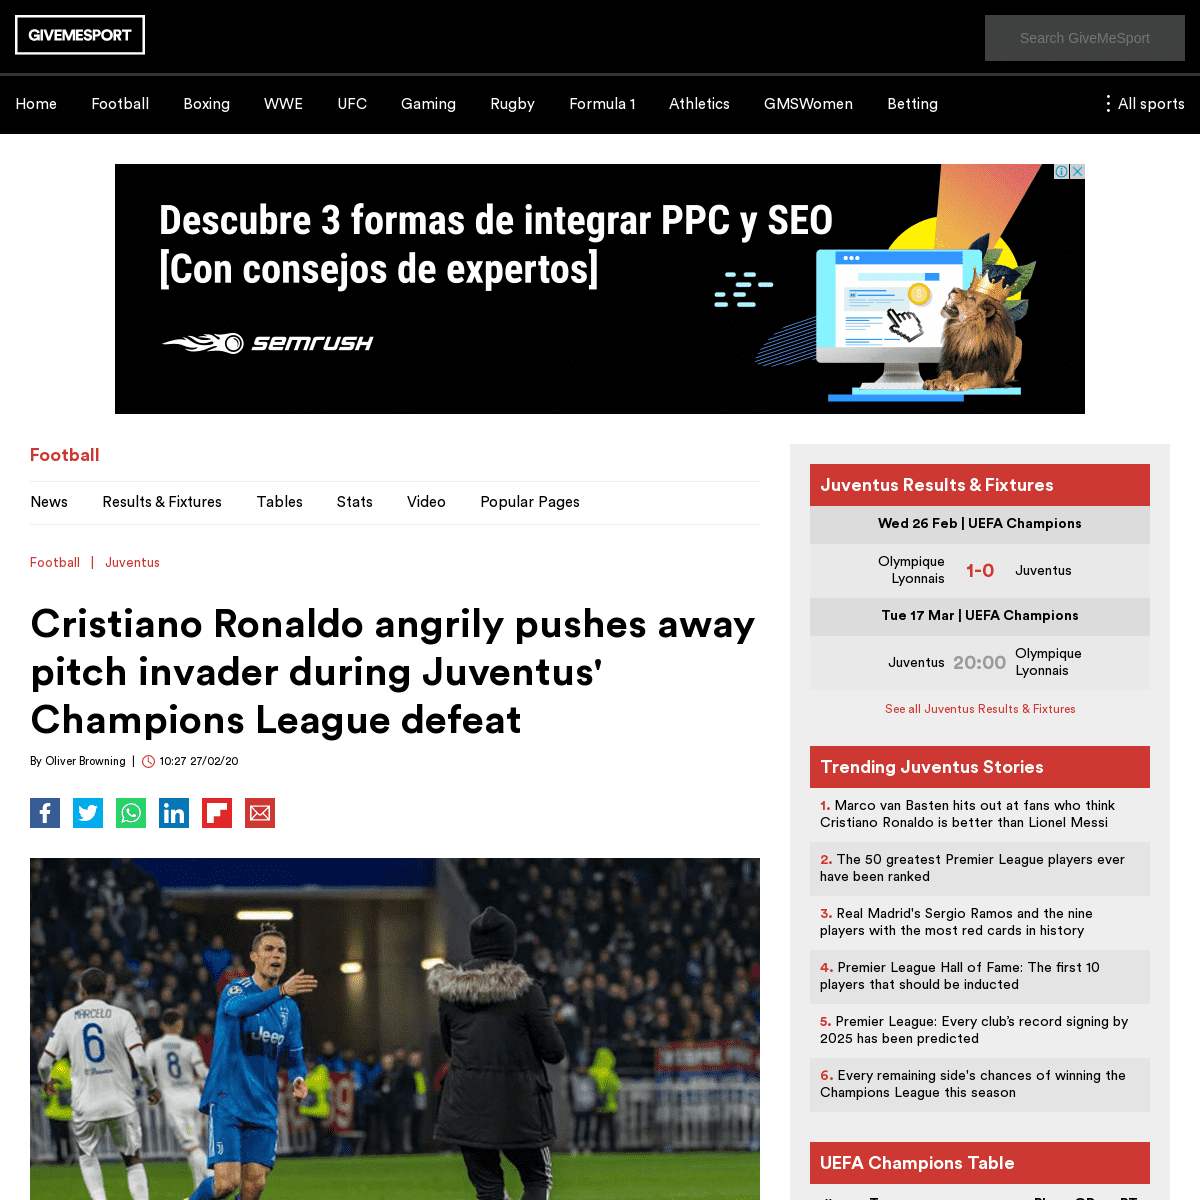 A complete backup of www.givemesport.com/1550458-cristiano-ronaldo-angrily-pushes-away-pitch-invader-during-juventus-champions-l